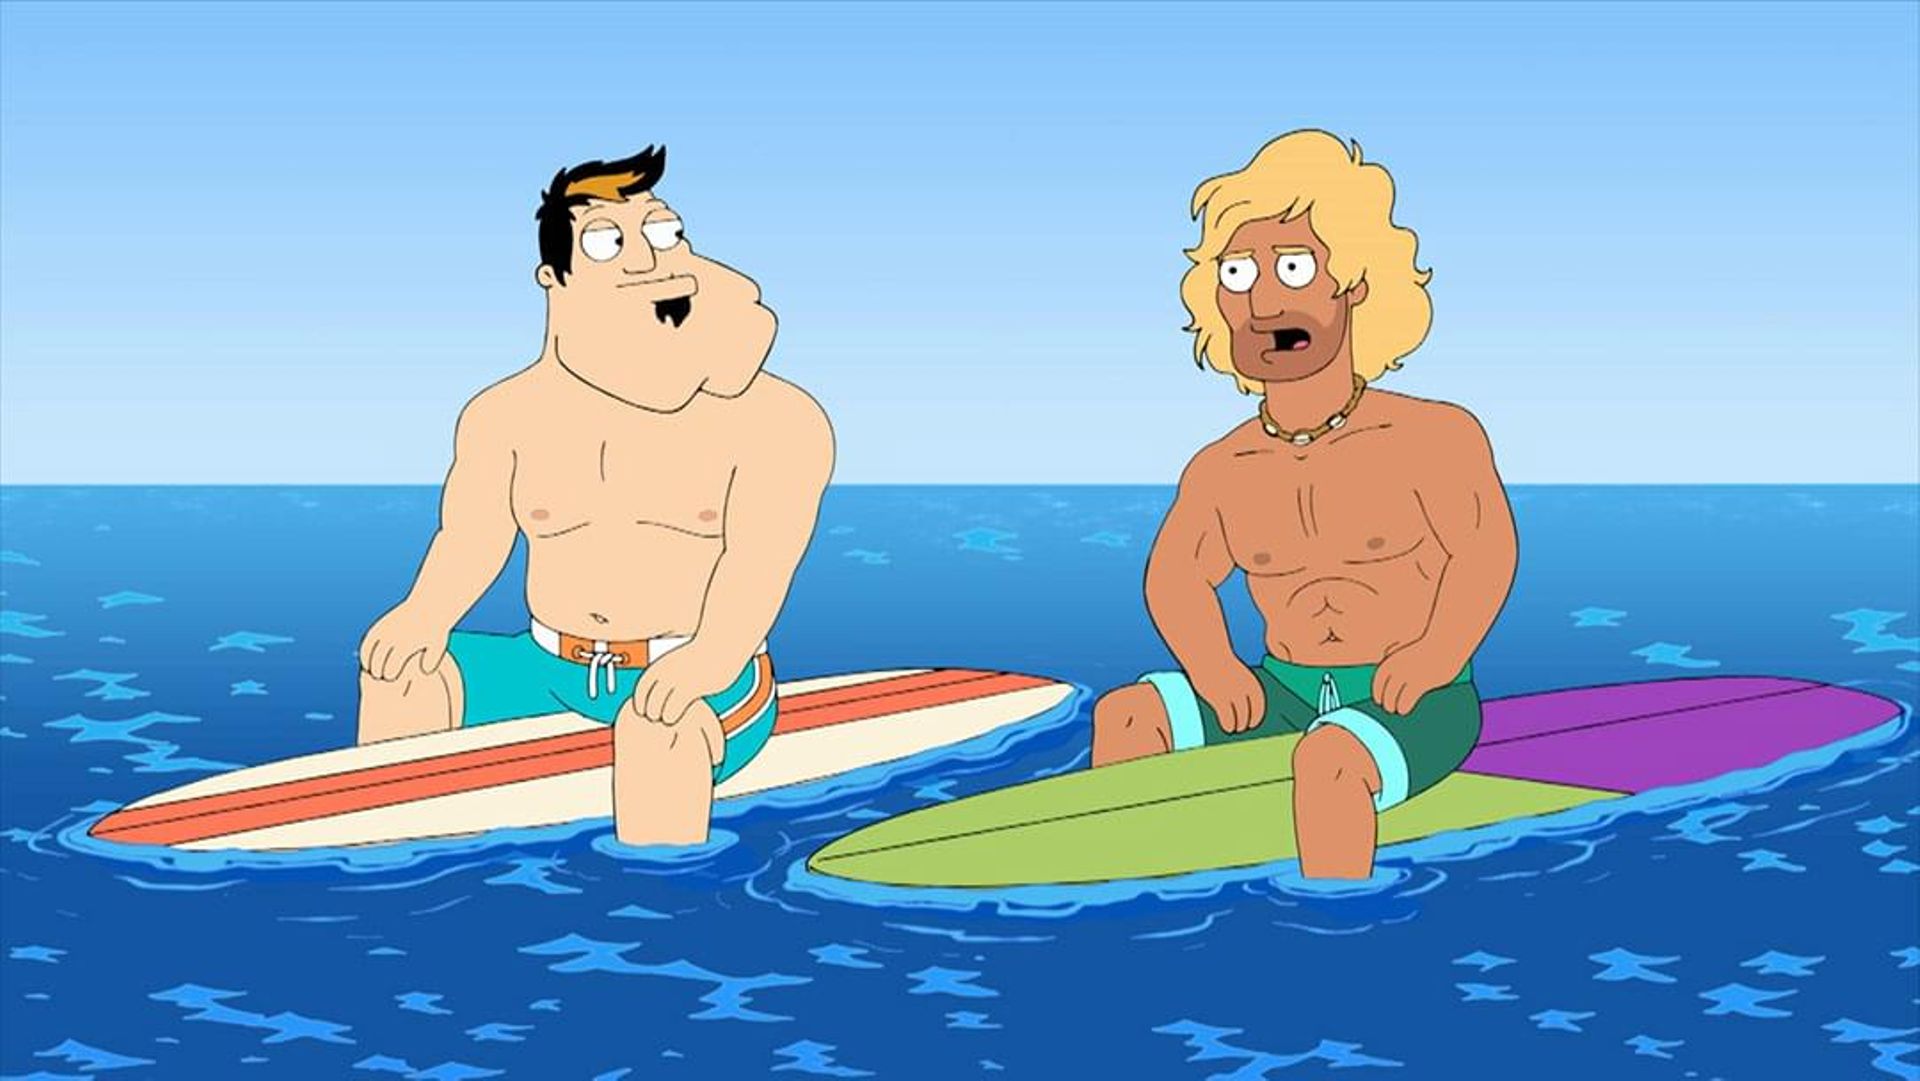 Watch American Dad! Episodes and Clips for Free from Adult Swim